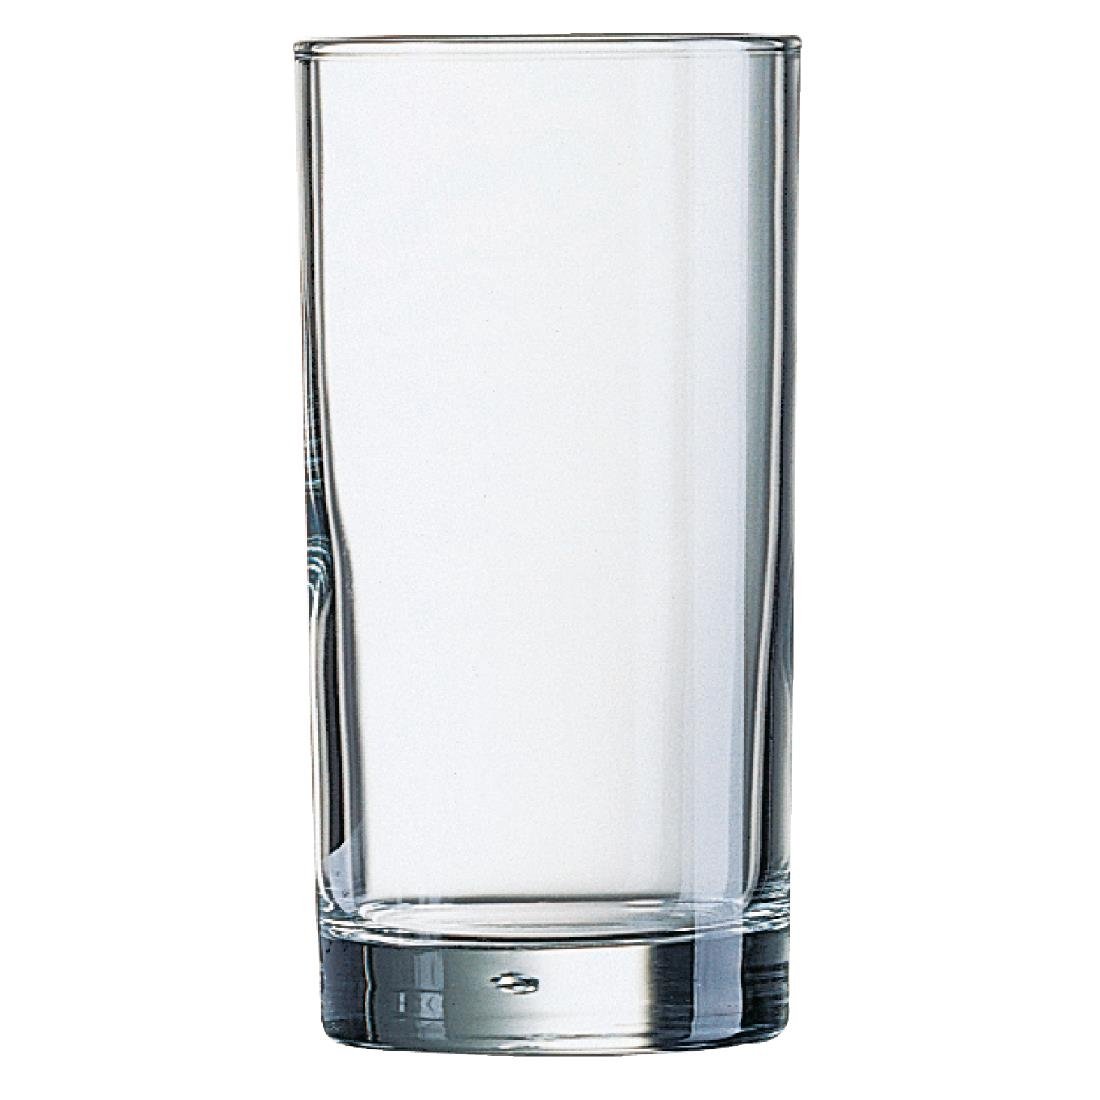 D898 Arcoroc Hi Ball Nucleated Glasses 285ml CE Marked (Pack of 48) JD Catering Equipment Solutions Ltd